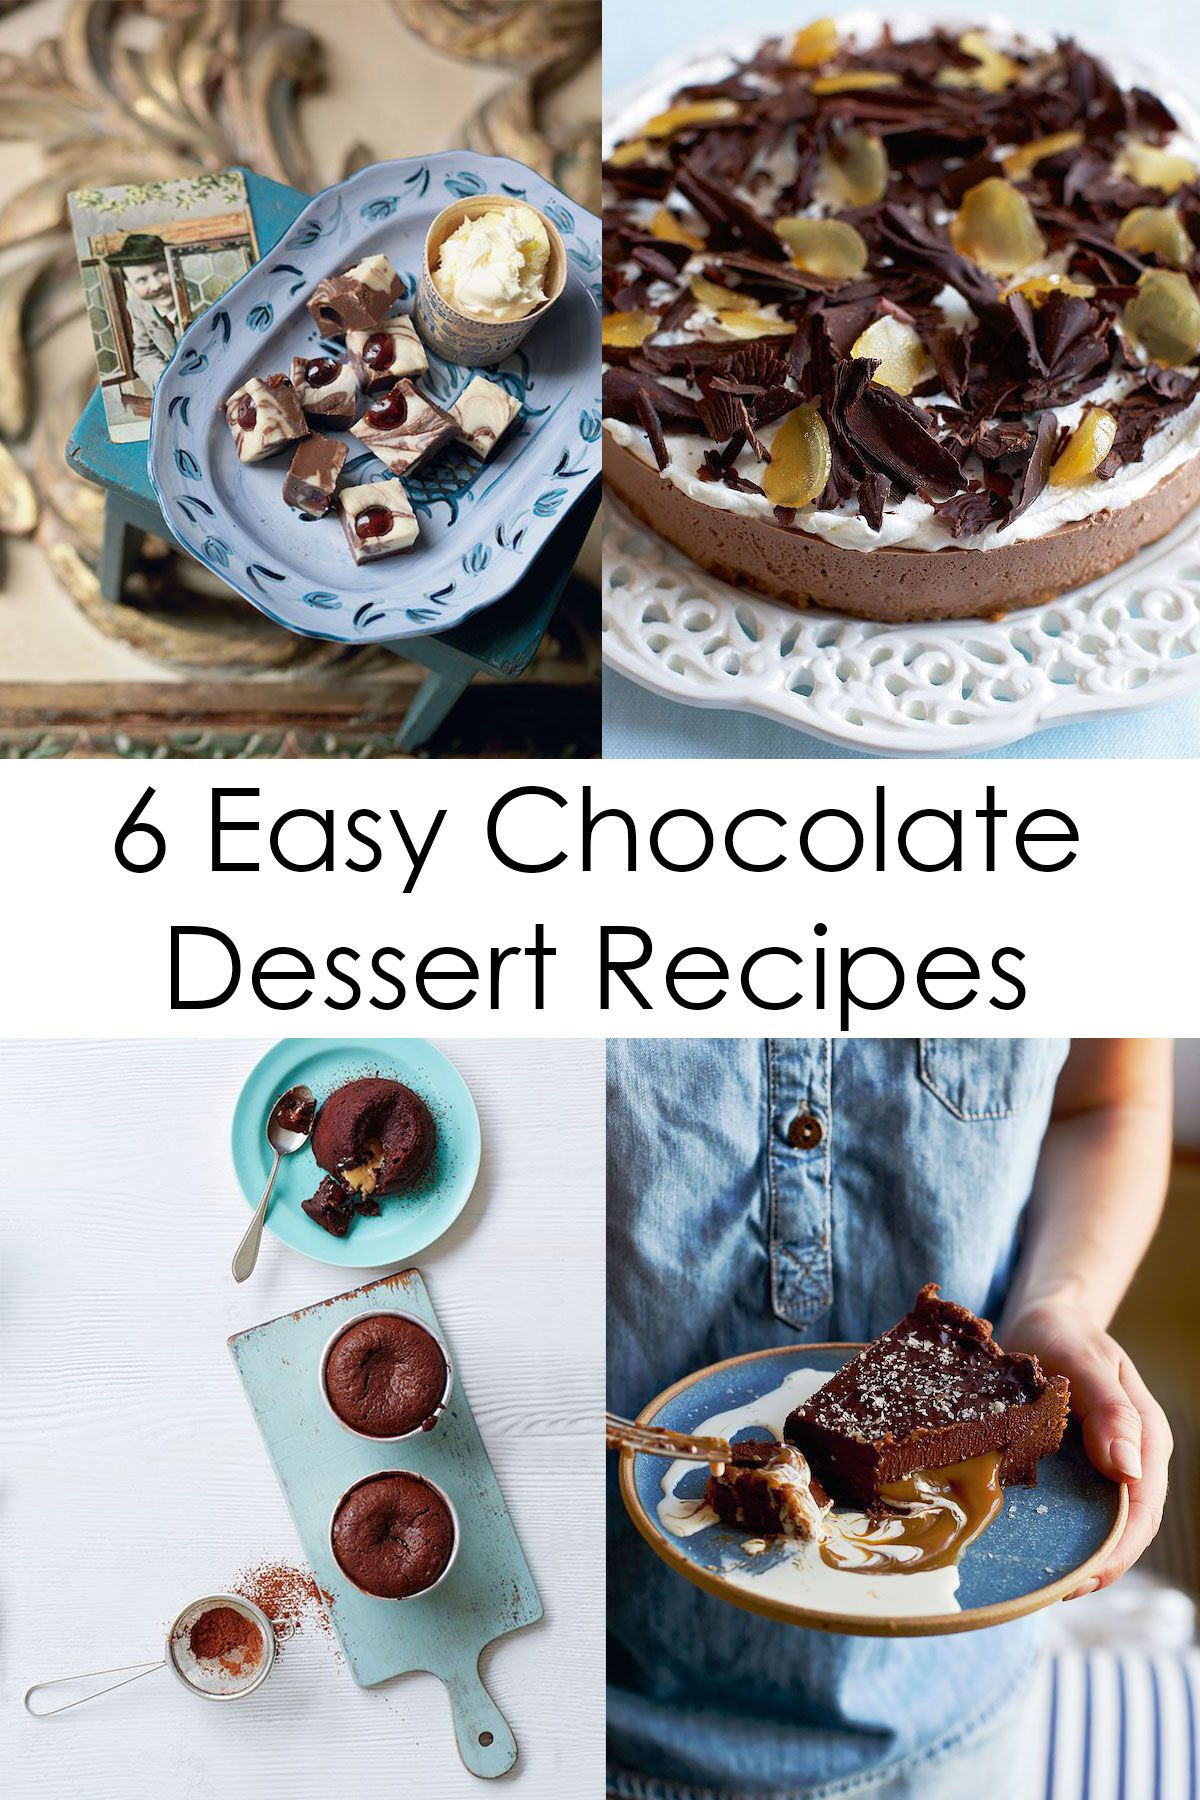 Dinner Party Desserts To Make Ahead
 Pin by The Happy Foo on Dinner Party Desserts